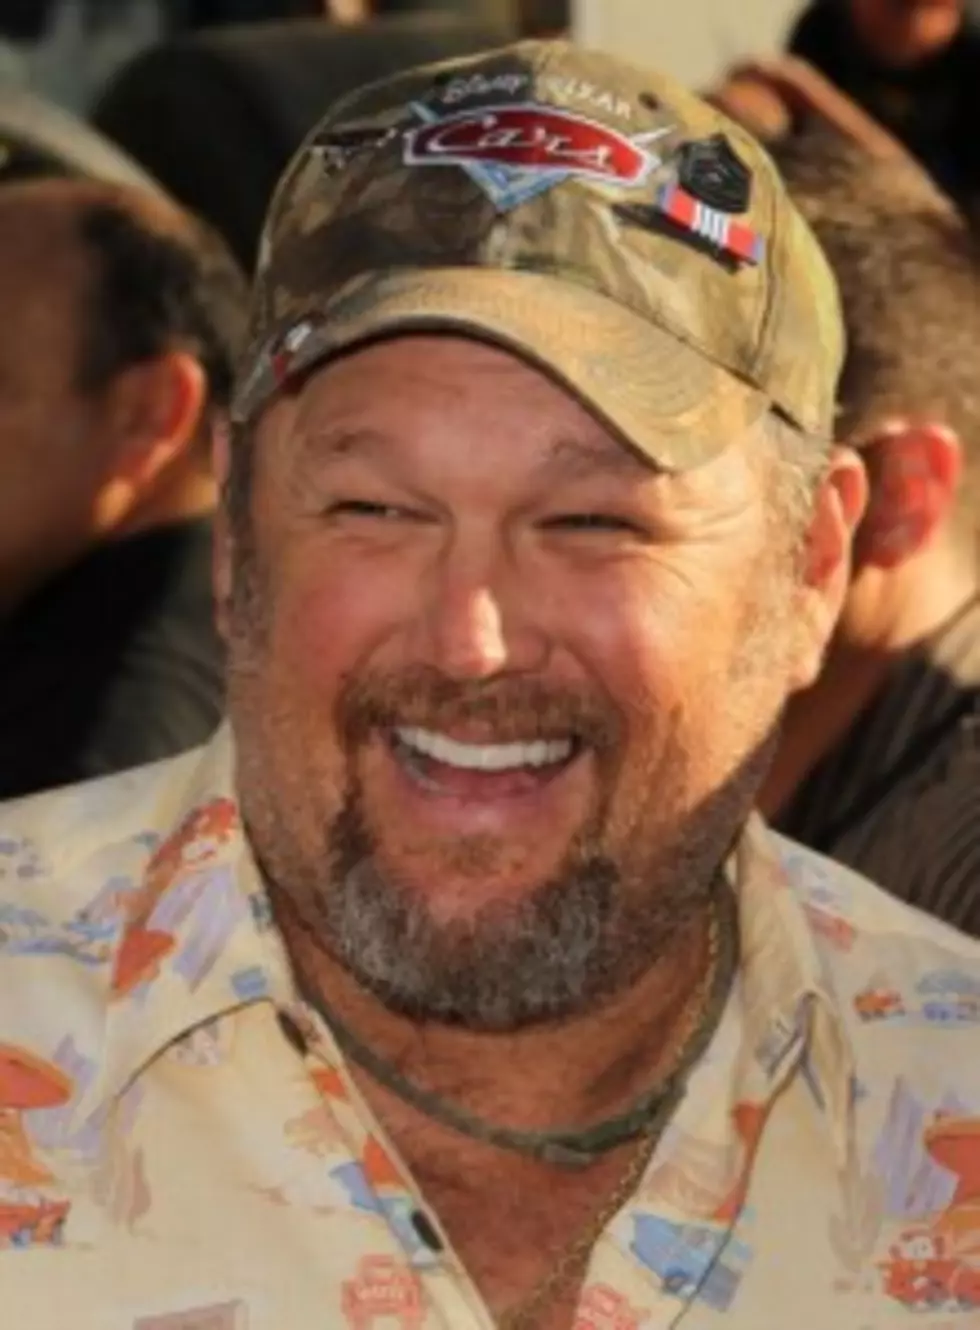 Larry The Cable Guy with Andy and Tasha [AUDIO]